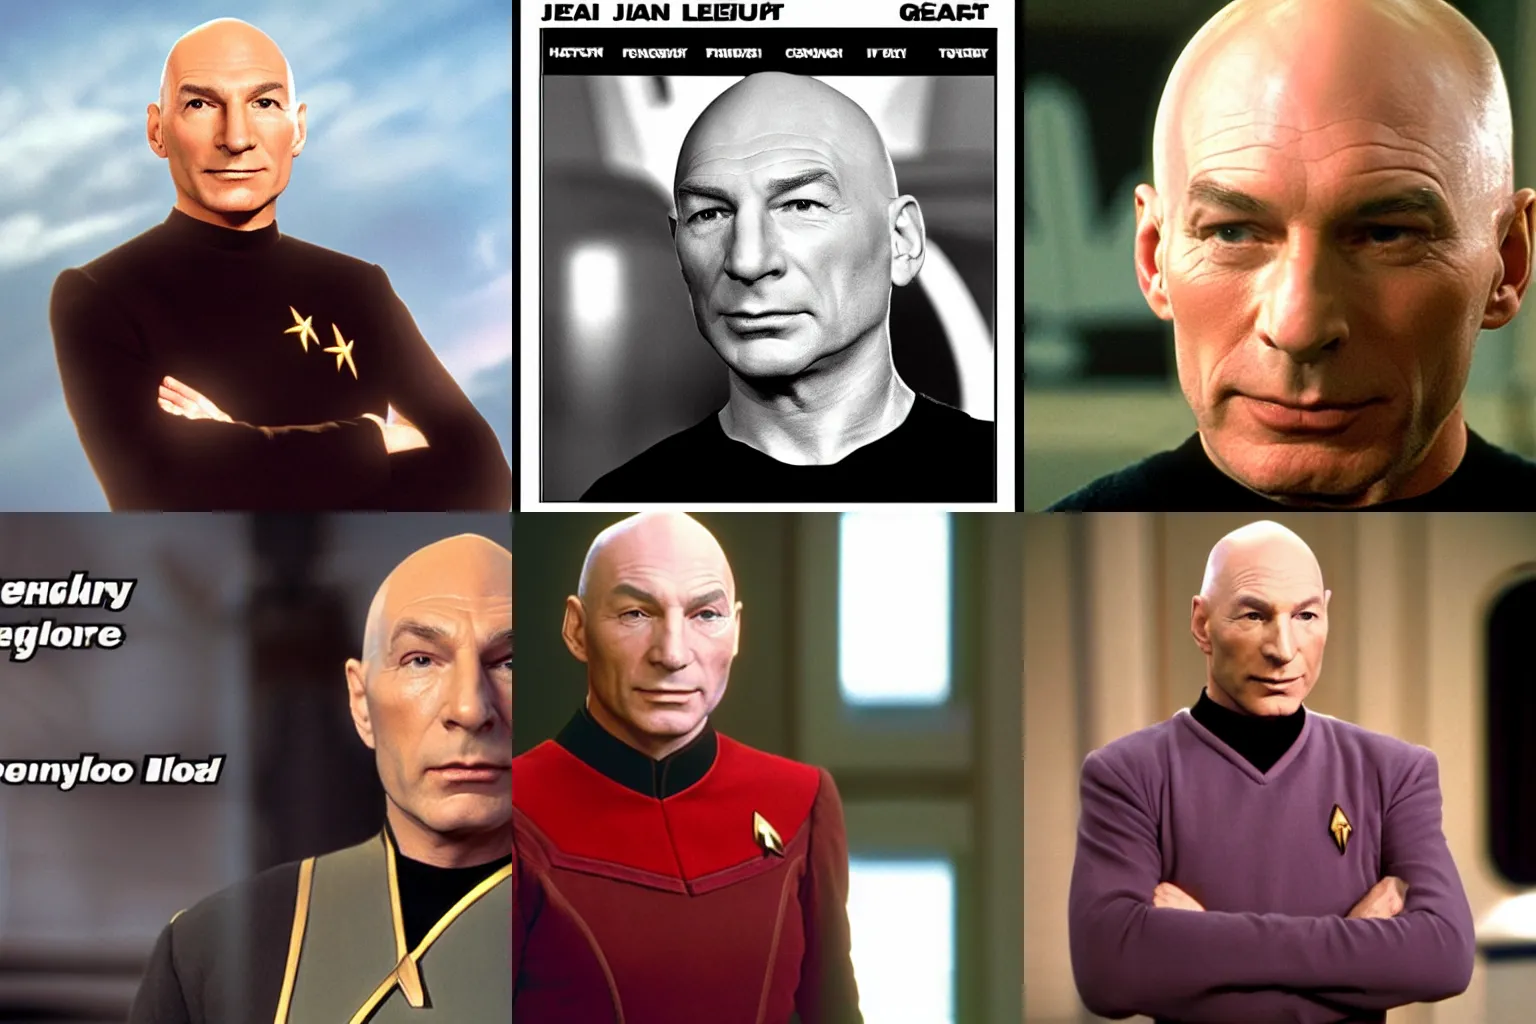 Prompt: Jean-Luc Picard